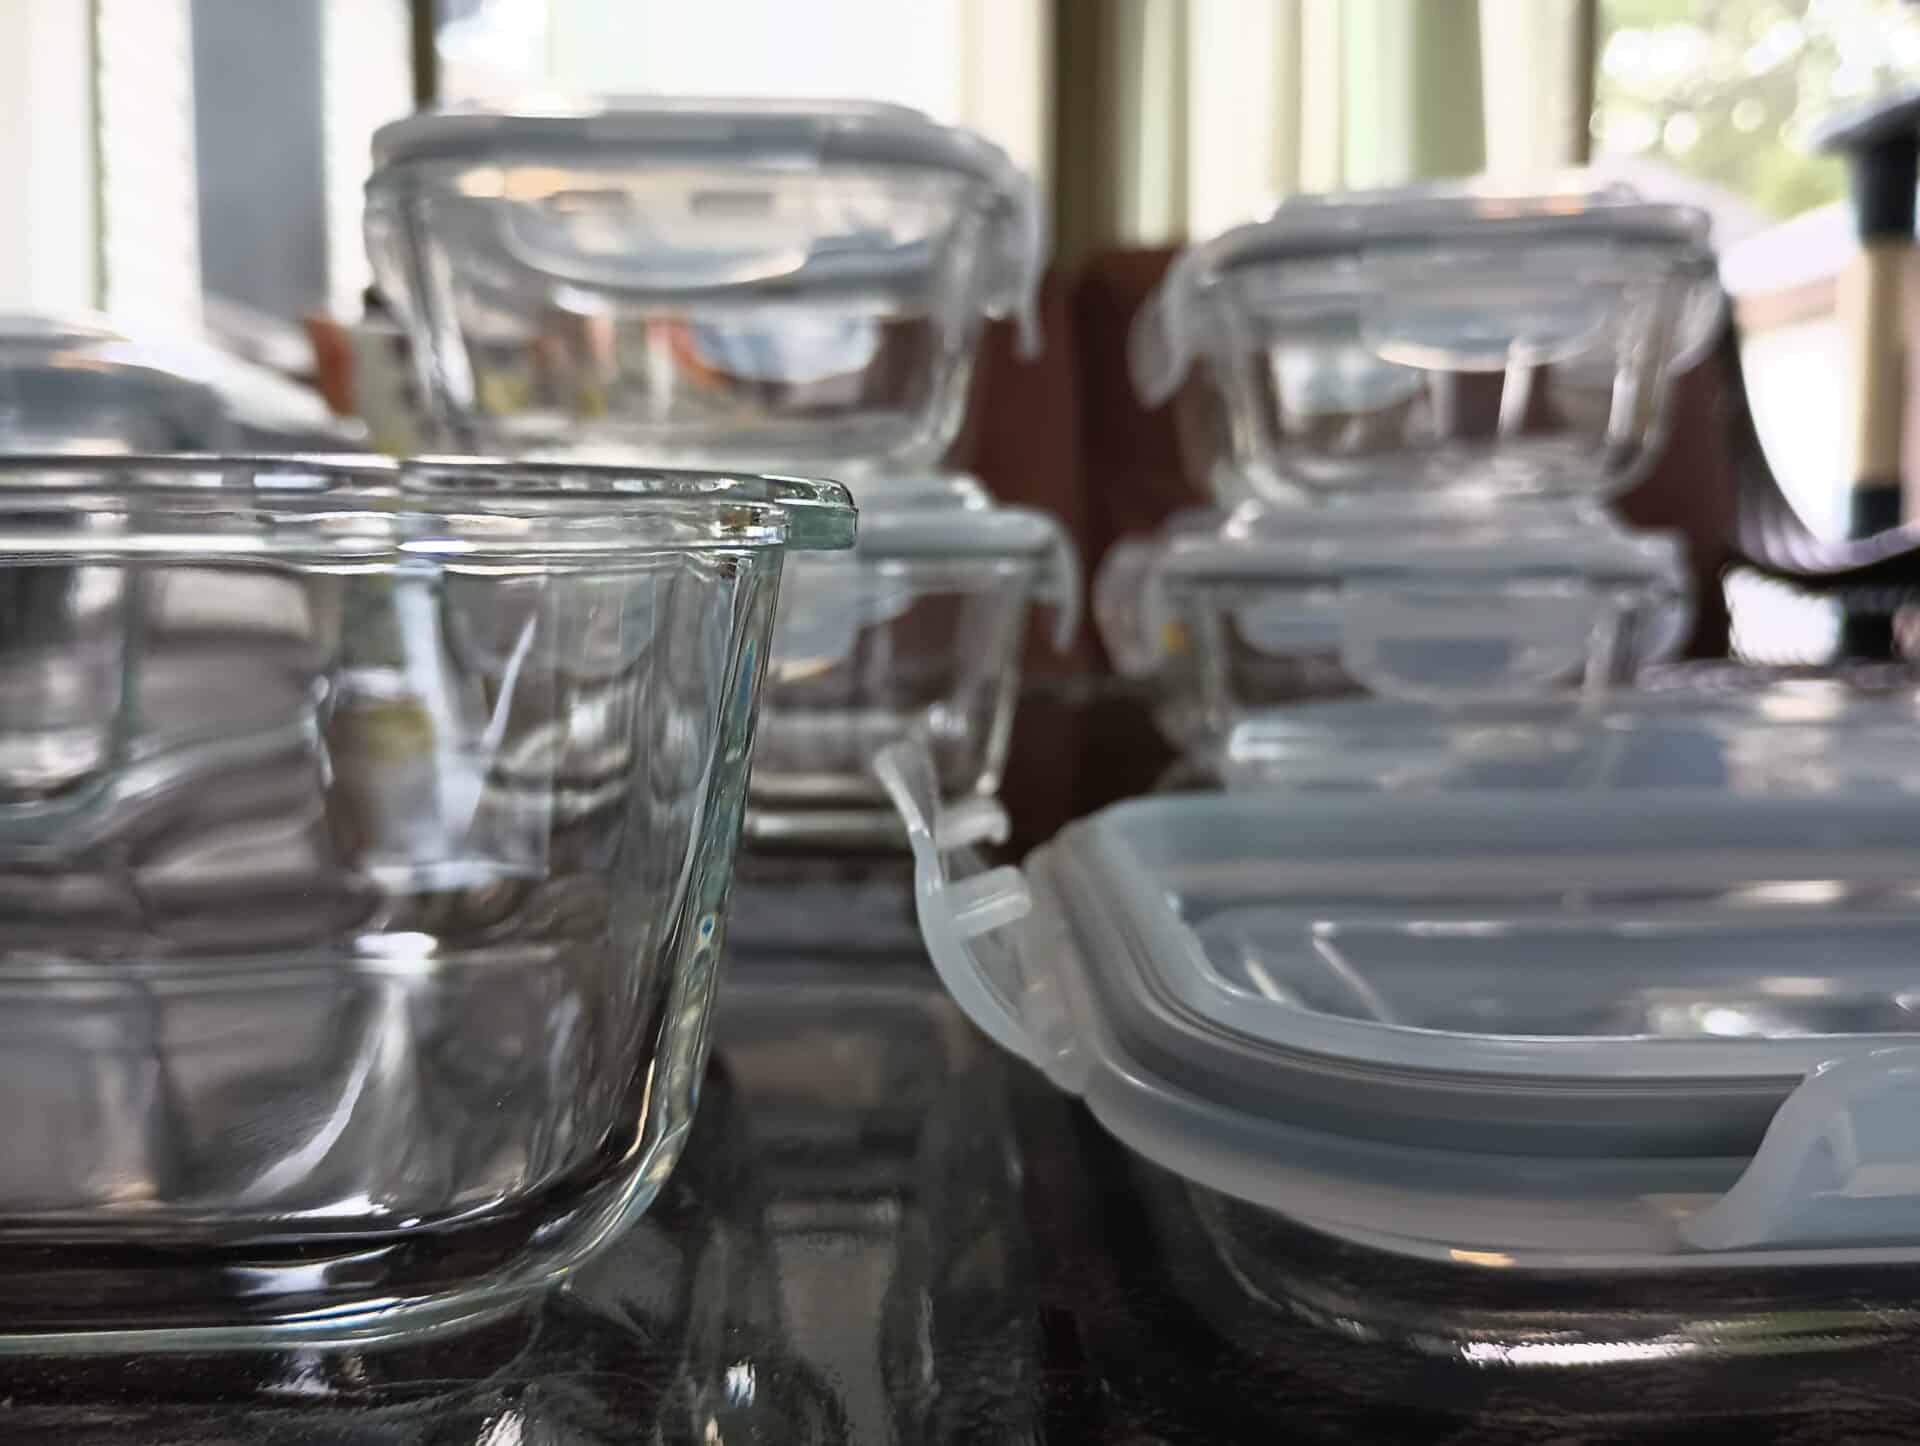 https://www.aldireviewer.com/wp-content/uploads/2023/05/Crofton-Glass-Bowls-with-Snapping-Lids-5.jpg